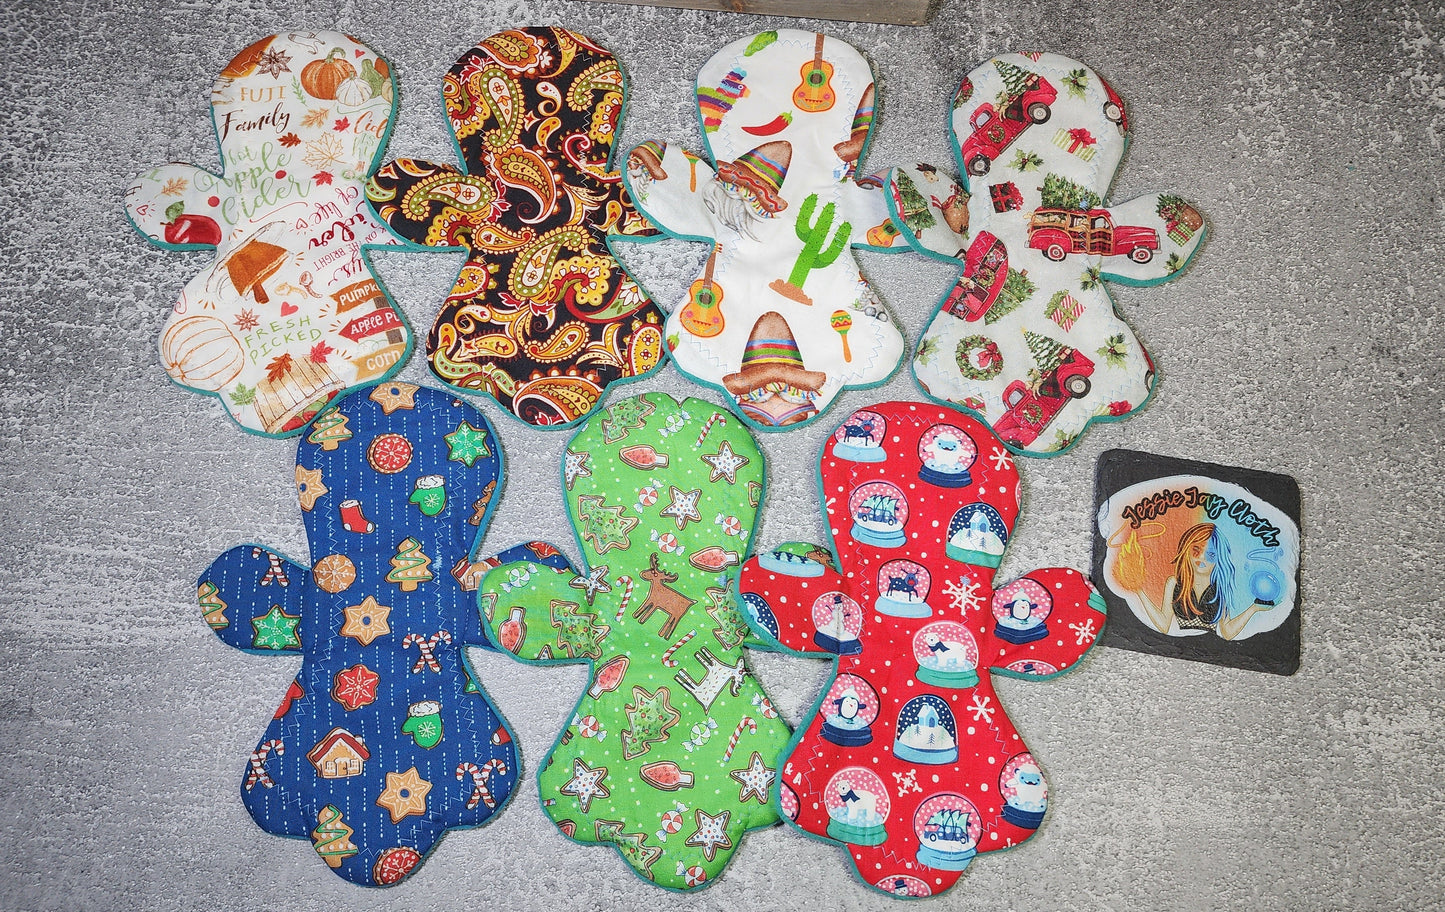 9" Miss Ginger Cloth Pad | Moderate Absorbency | Fall, Autumn, Paisley Print | 2.75 inch Snapped Width